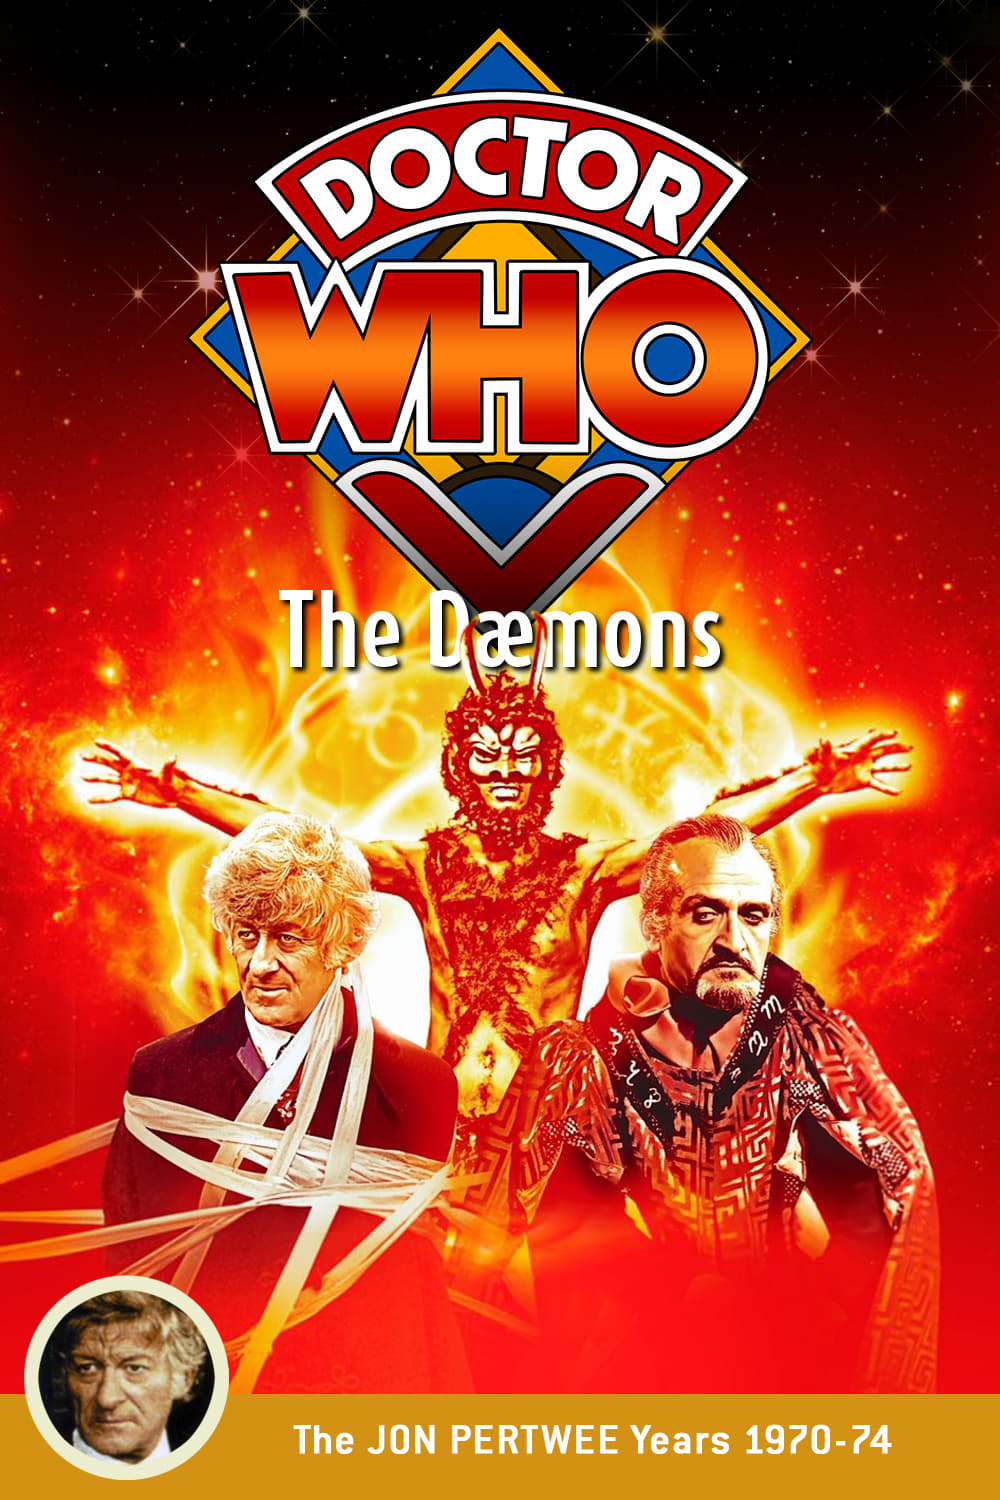 Doctor Who: The Dæmons (1971)